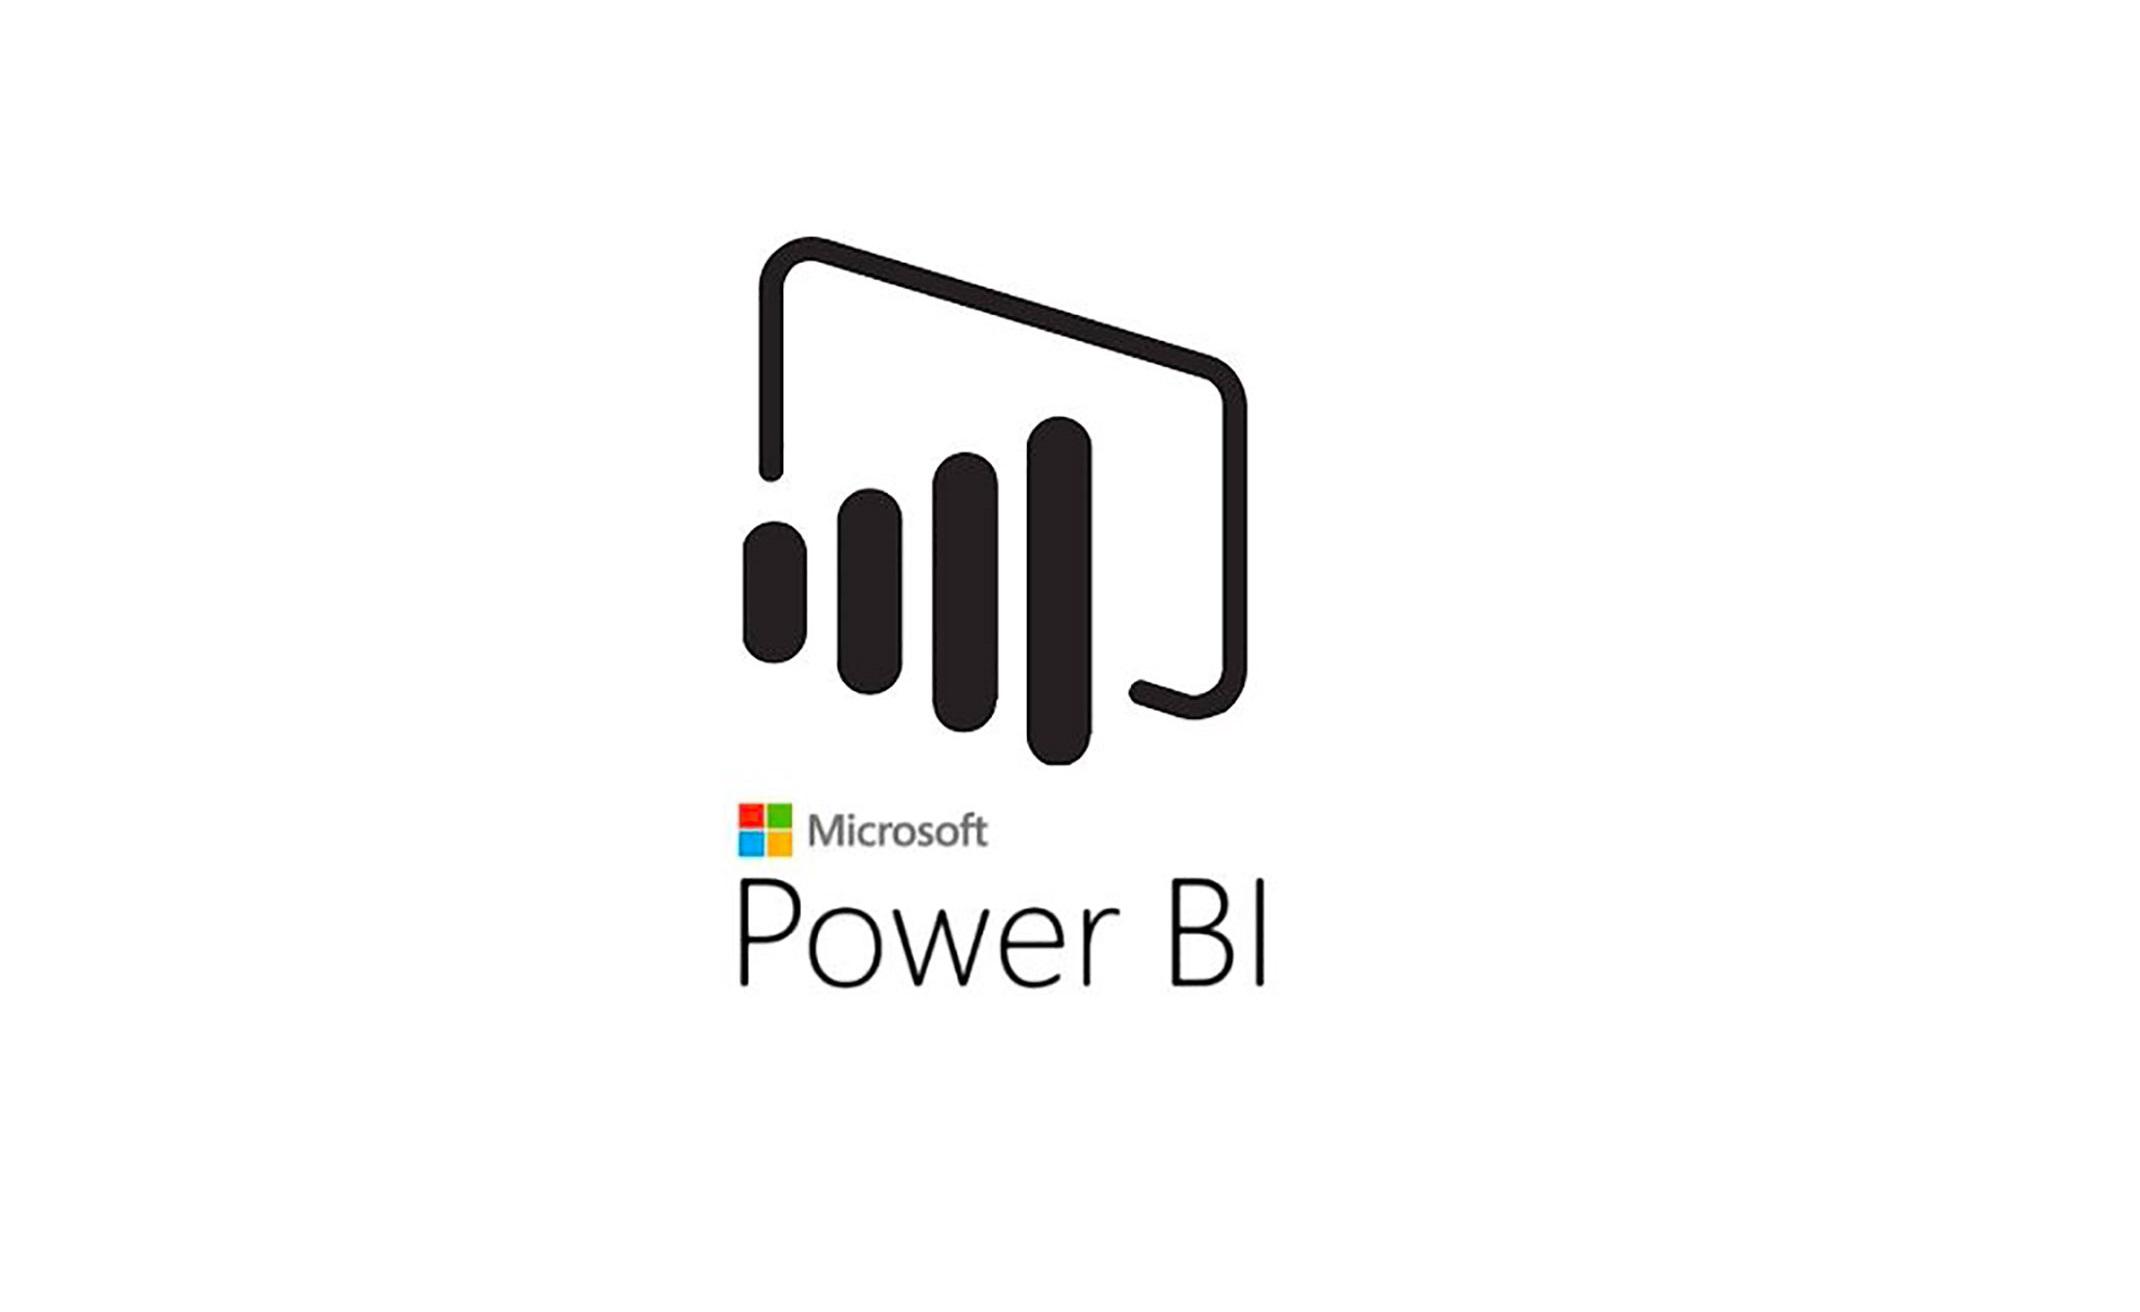 Microsoft Power BI Training in Bellevue, WA | Introduction to Power BI training for beginners | Getting started with Power BI | What is Power BI | January 20, 2020 - February 12, 2020